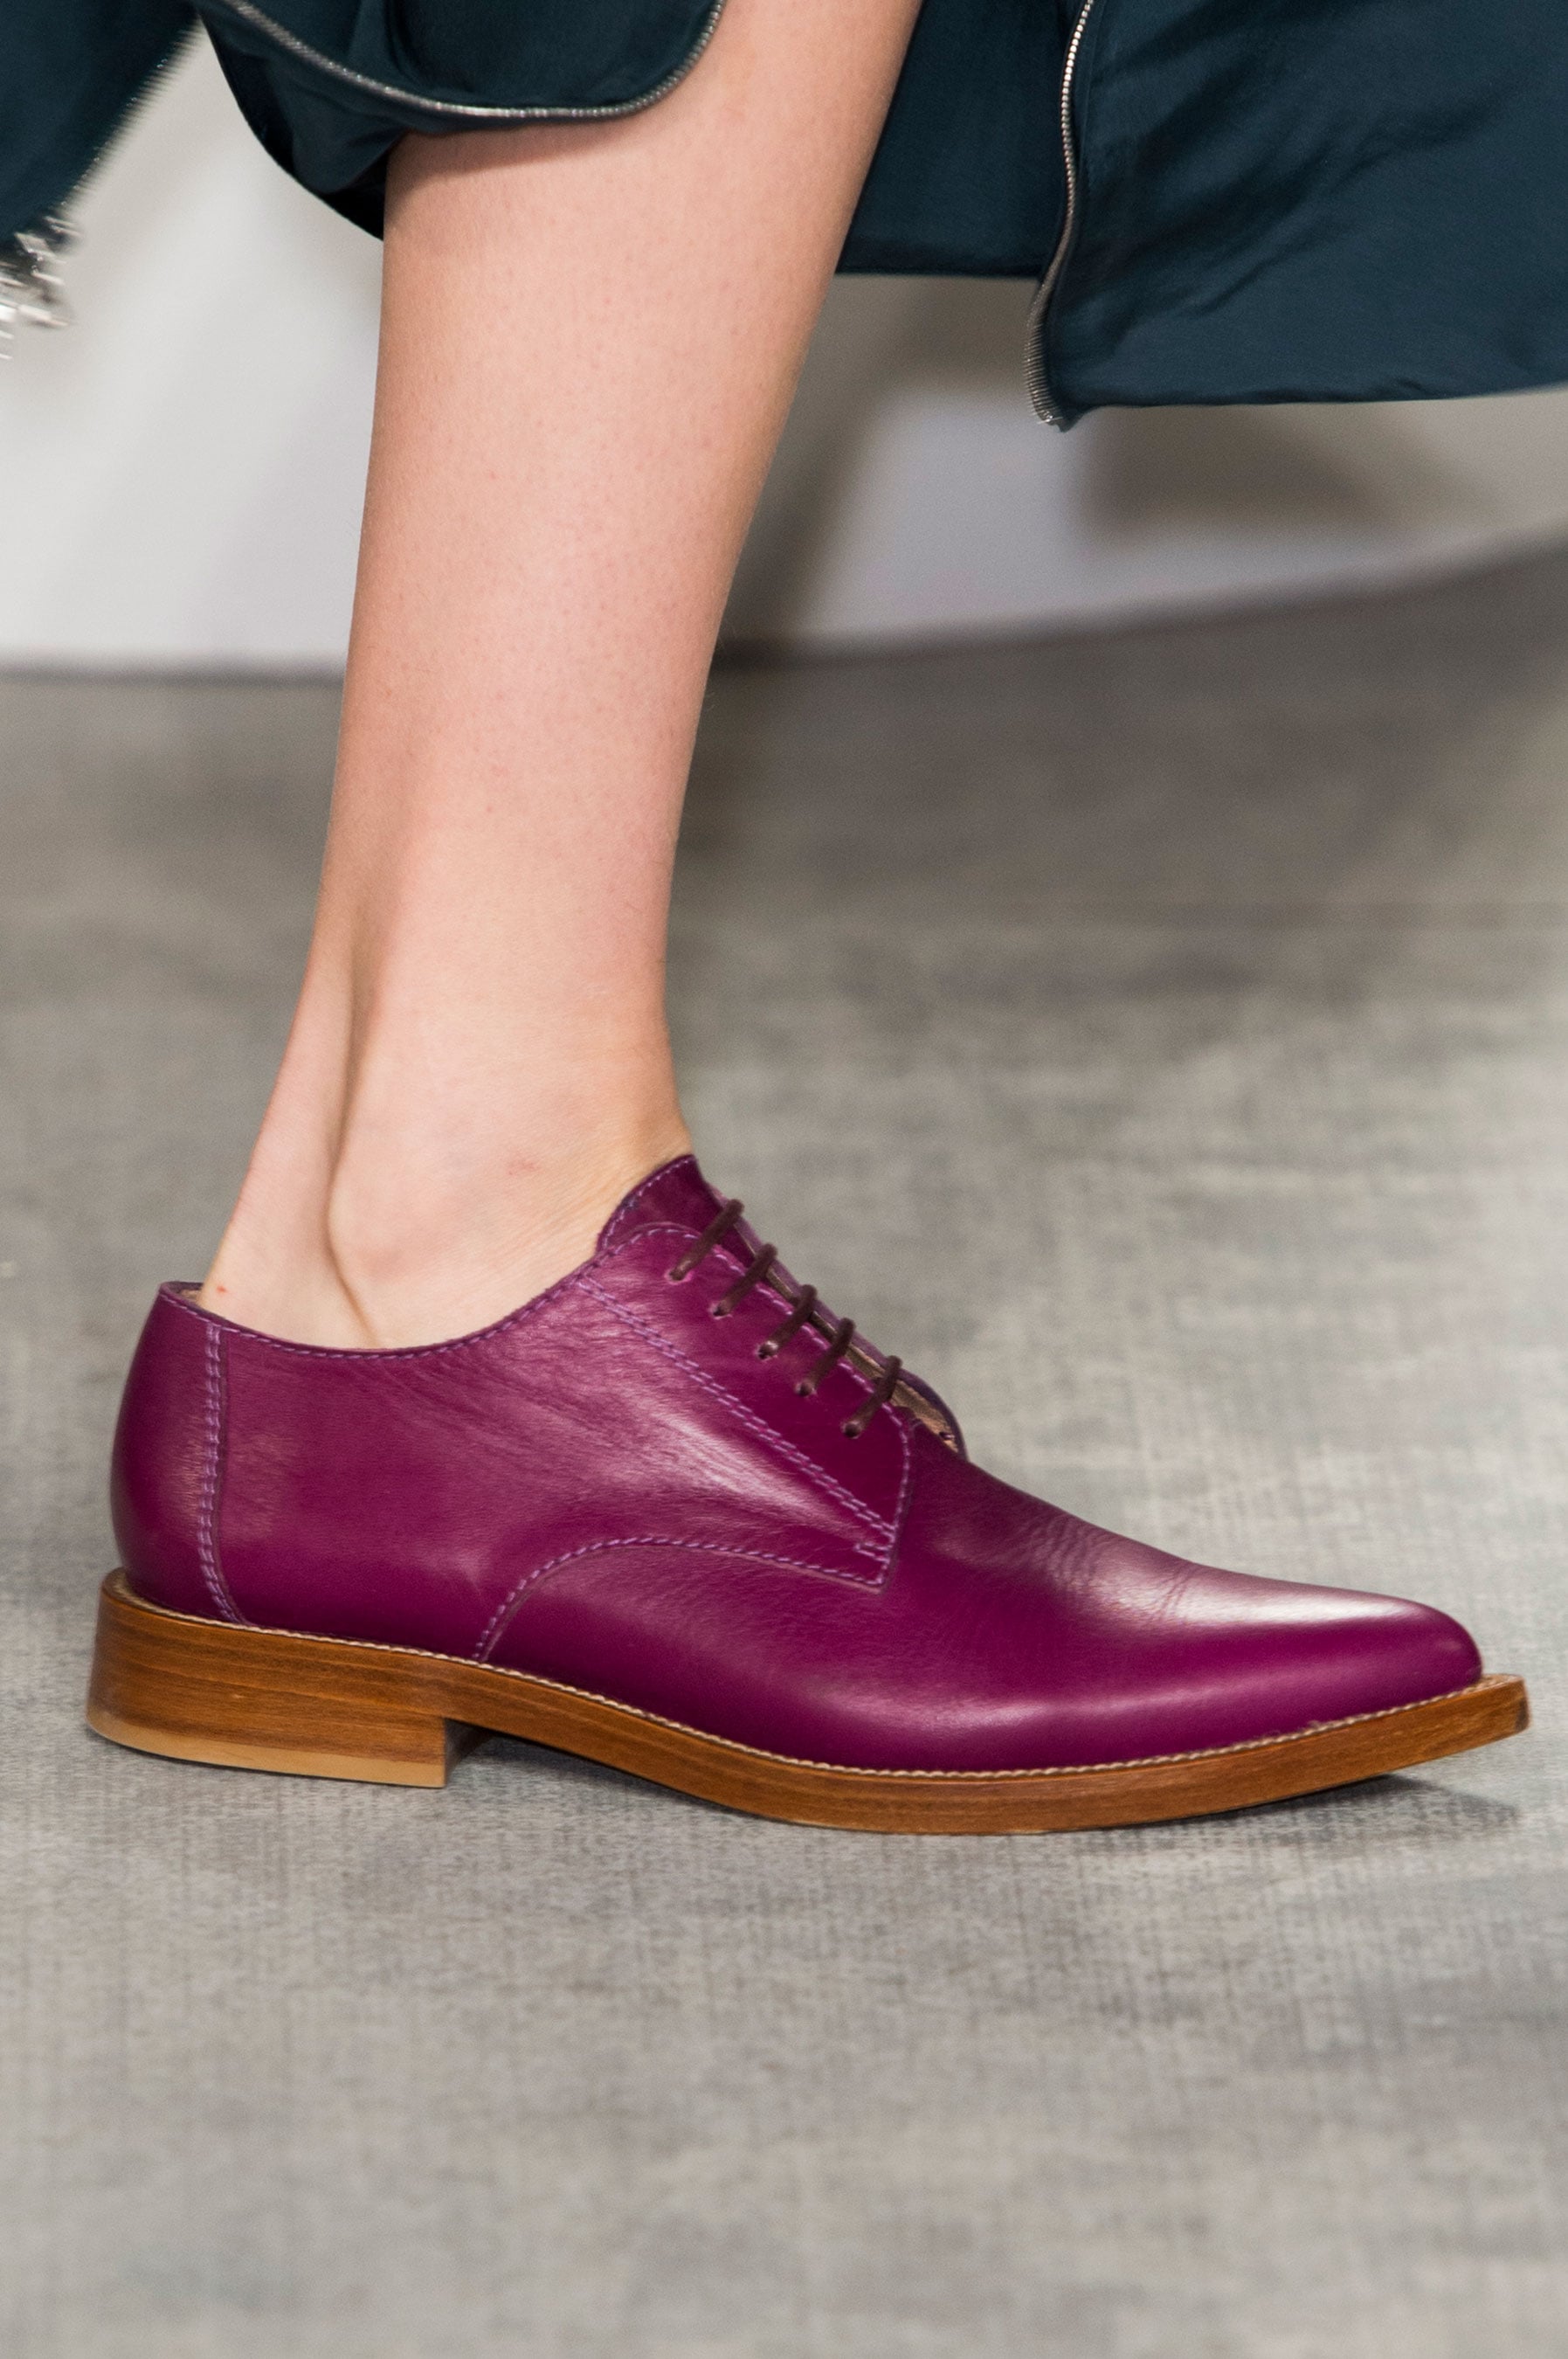 Lacoste Fall 2015 | The Shoes to Hit the Runways of New York Week | POPSUGAR Fashion Photo 87